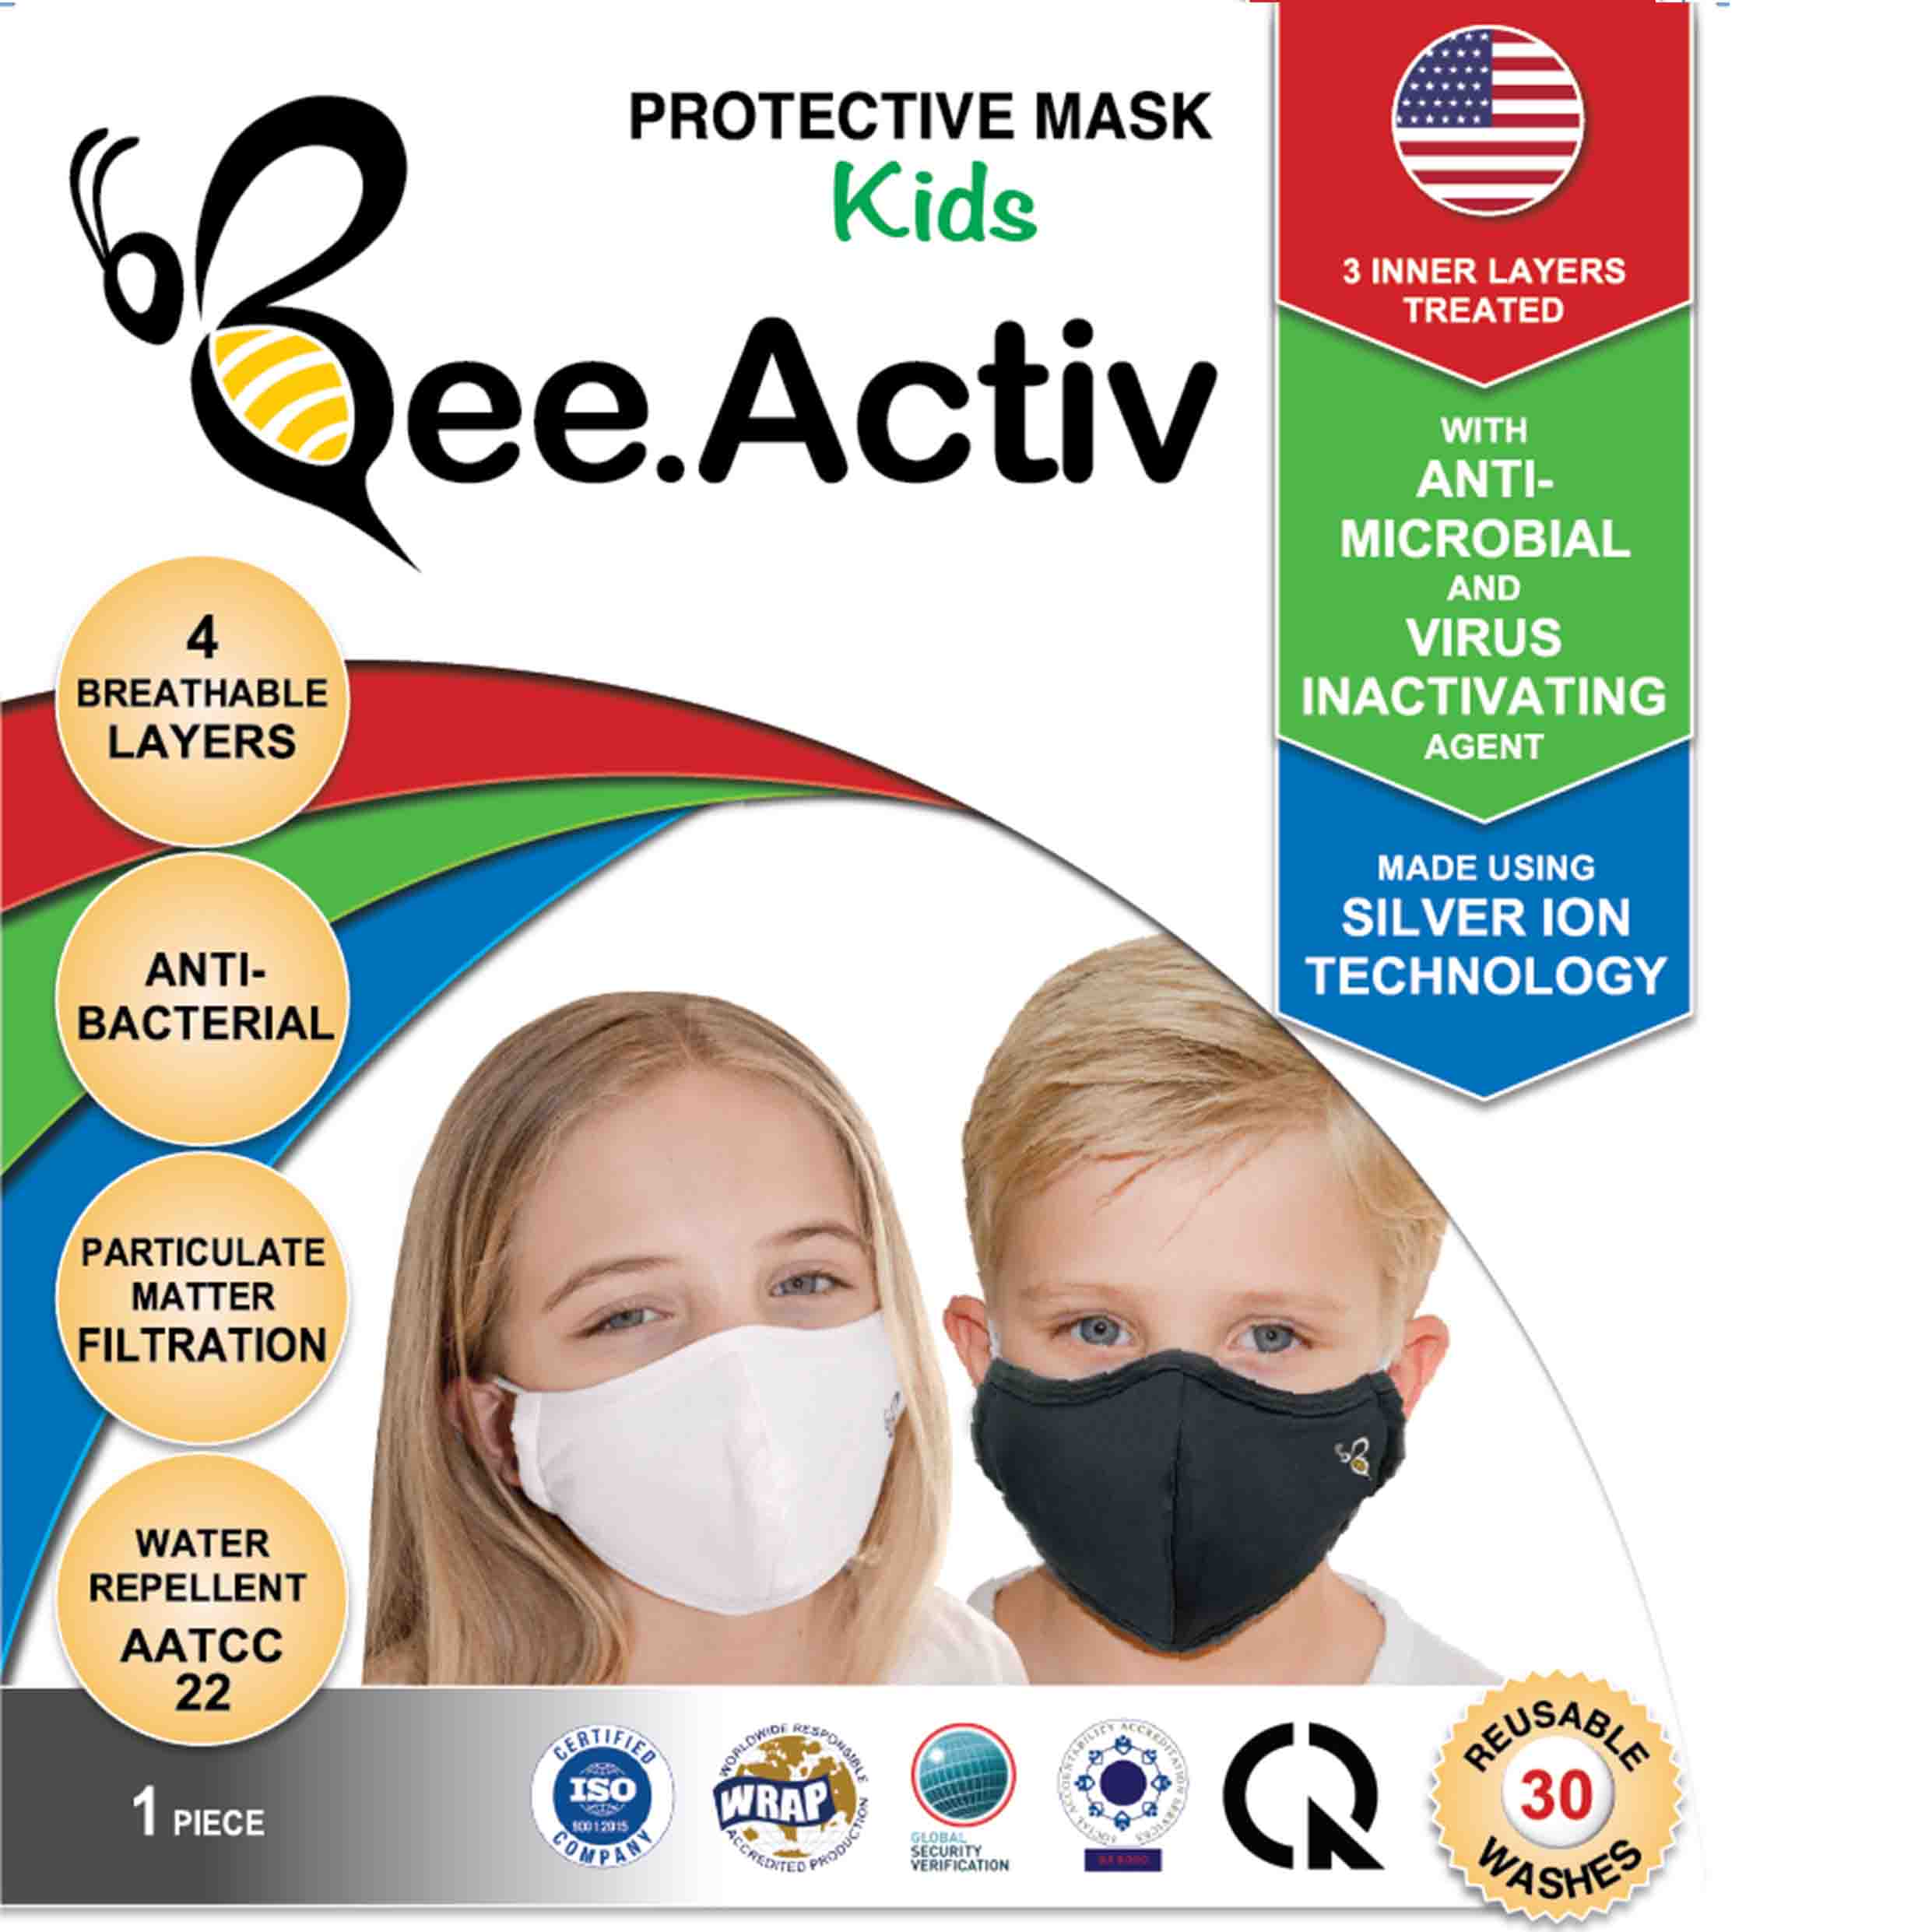 Protective mask 4-layer for kid